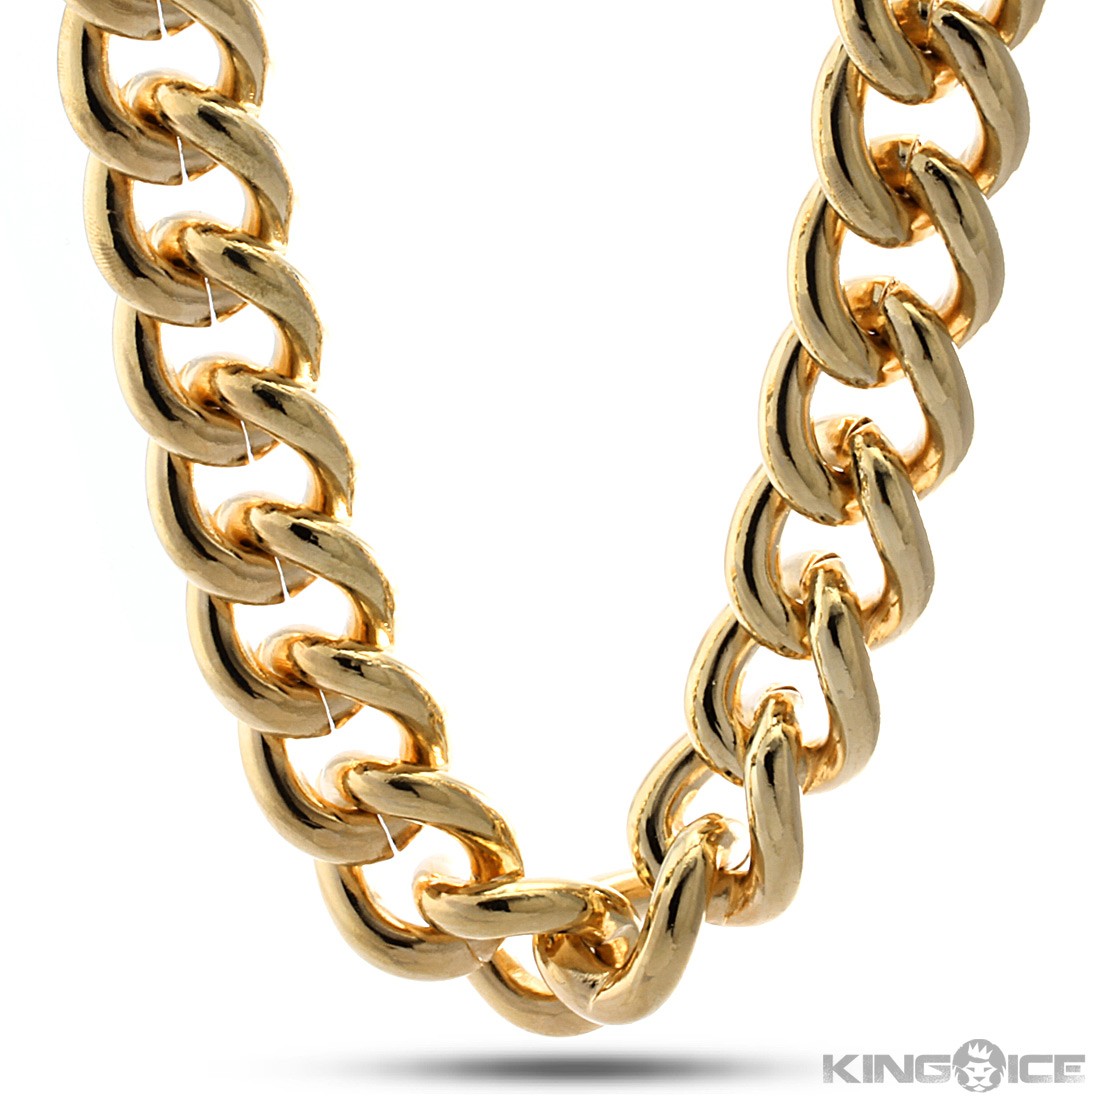 10k Yellow Gold Men's 5mm Curb-Link Chain Necklace, 20